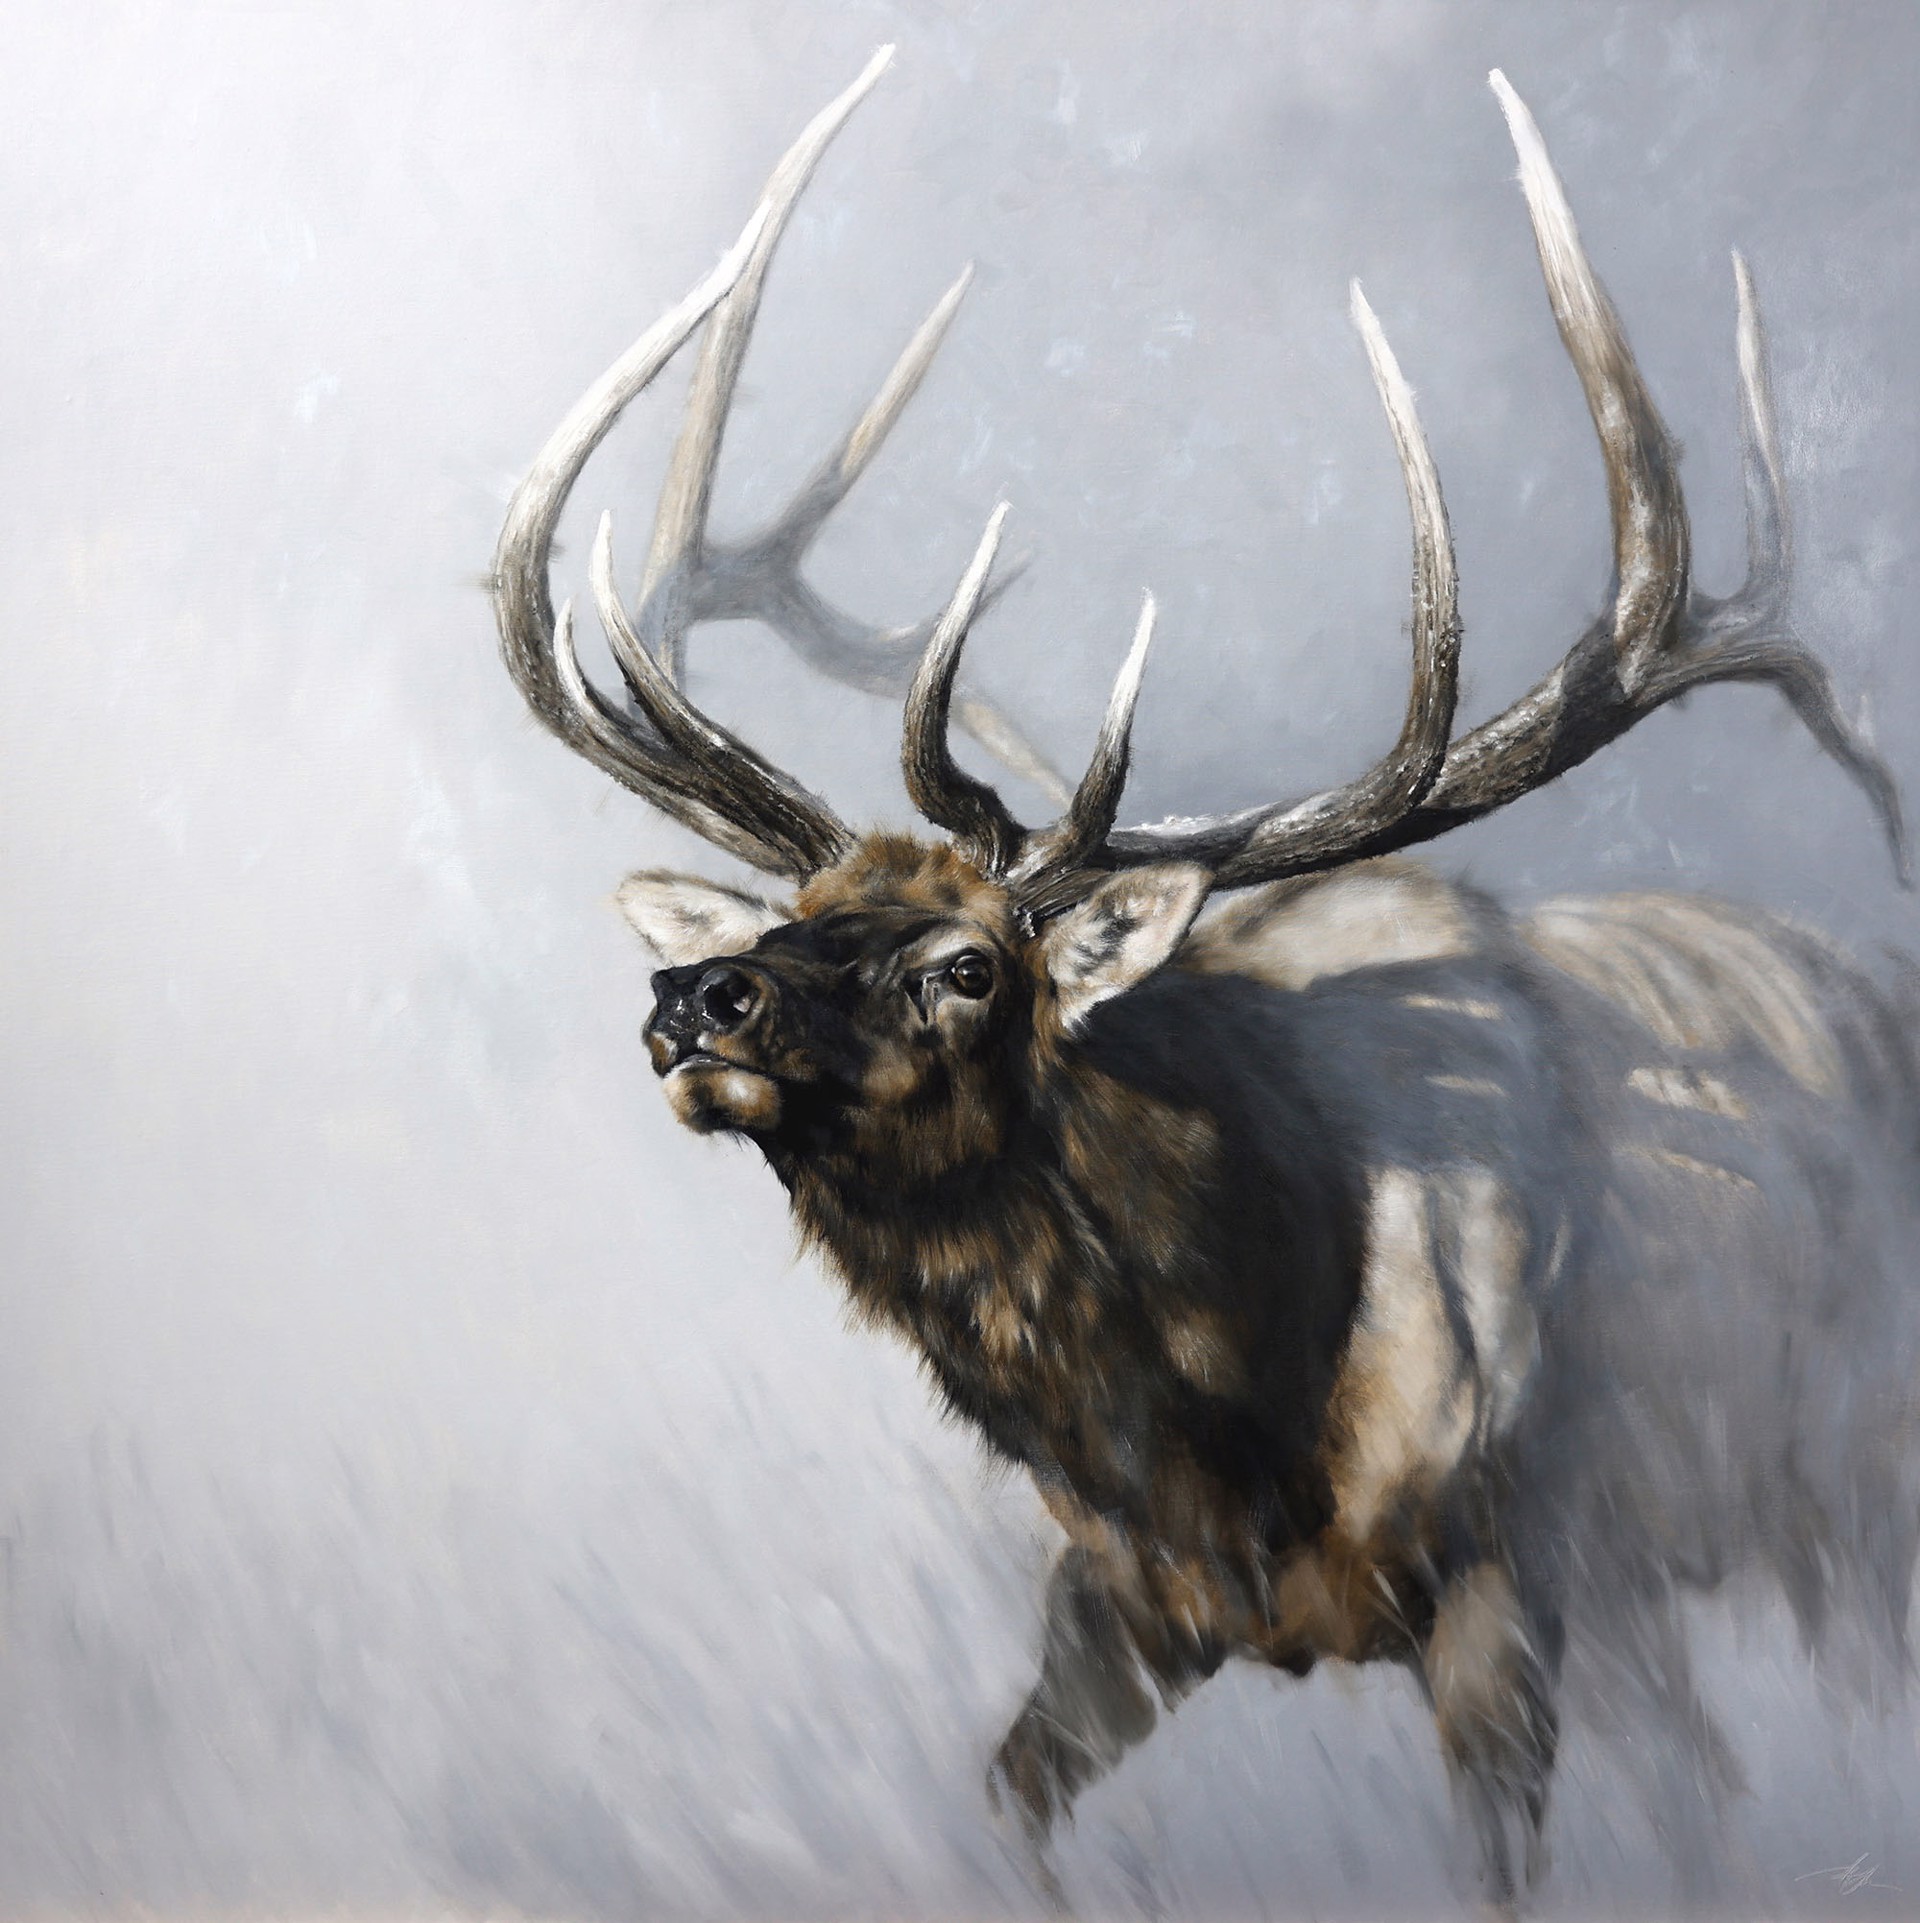 Original Oil Painting By Doyle Hostetler Featuring A Bull Elk In Rut